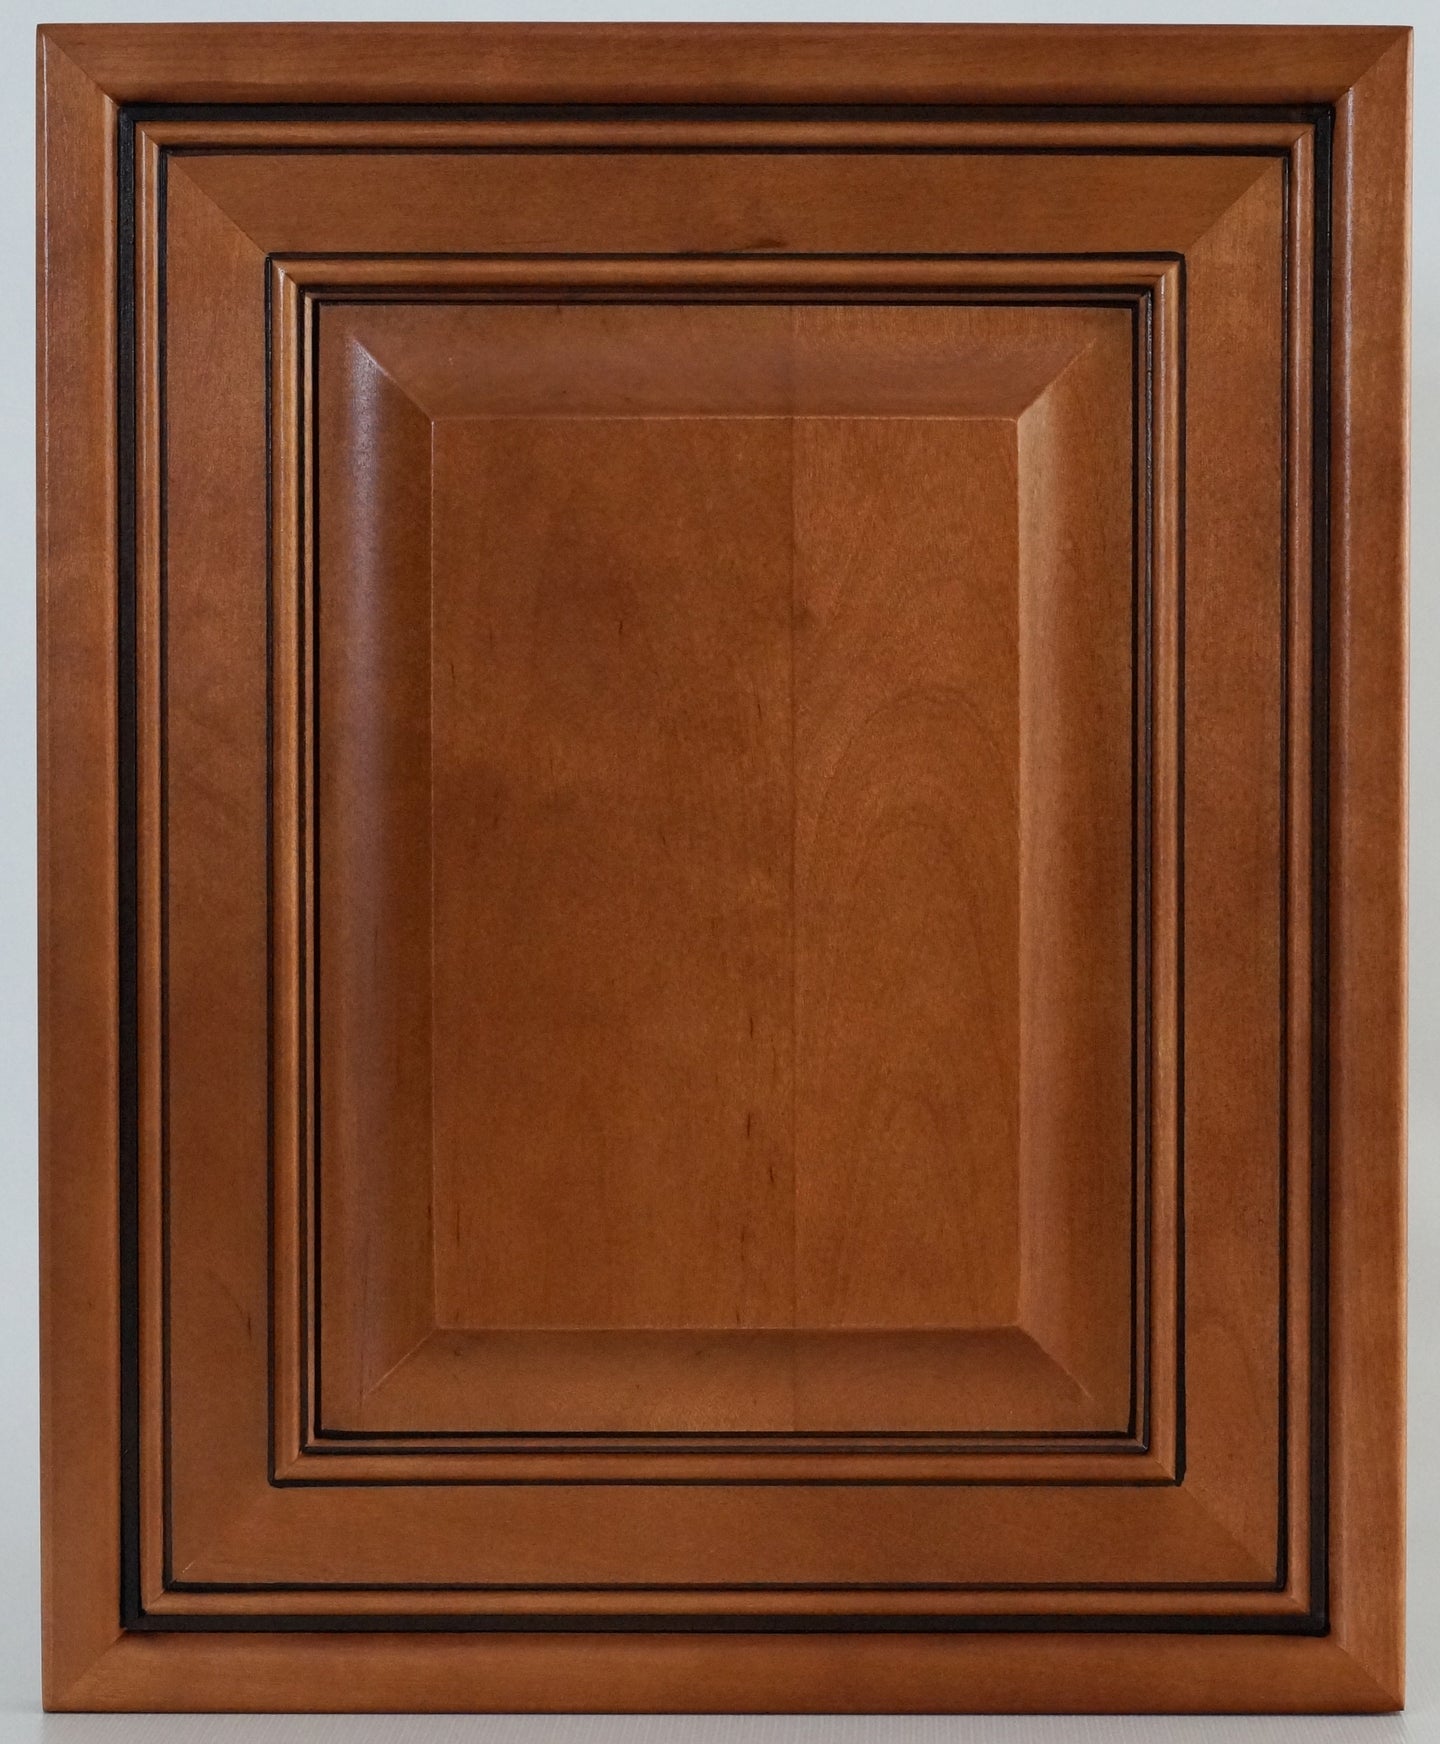 Glazed Mocha Maple Cabinet Door - Quality Kitchens For Less